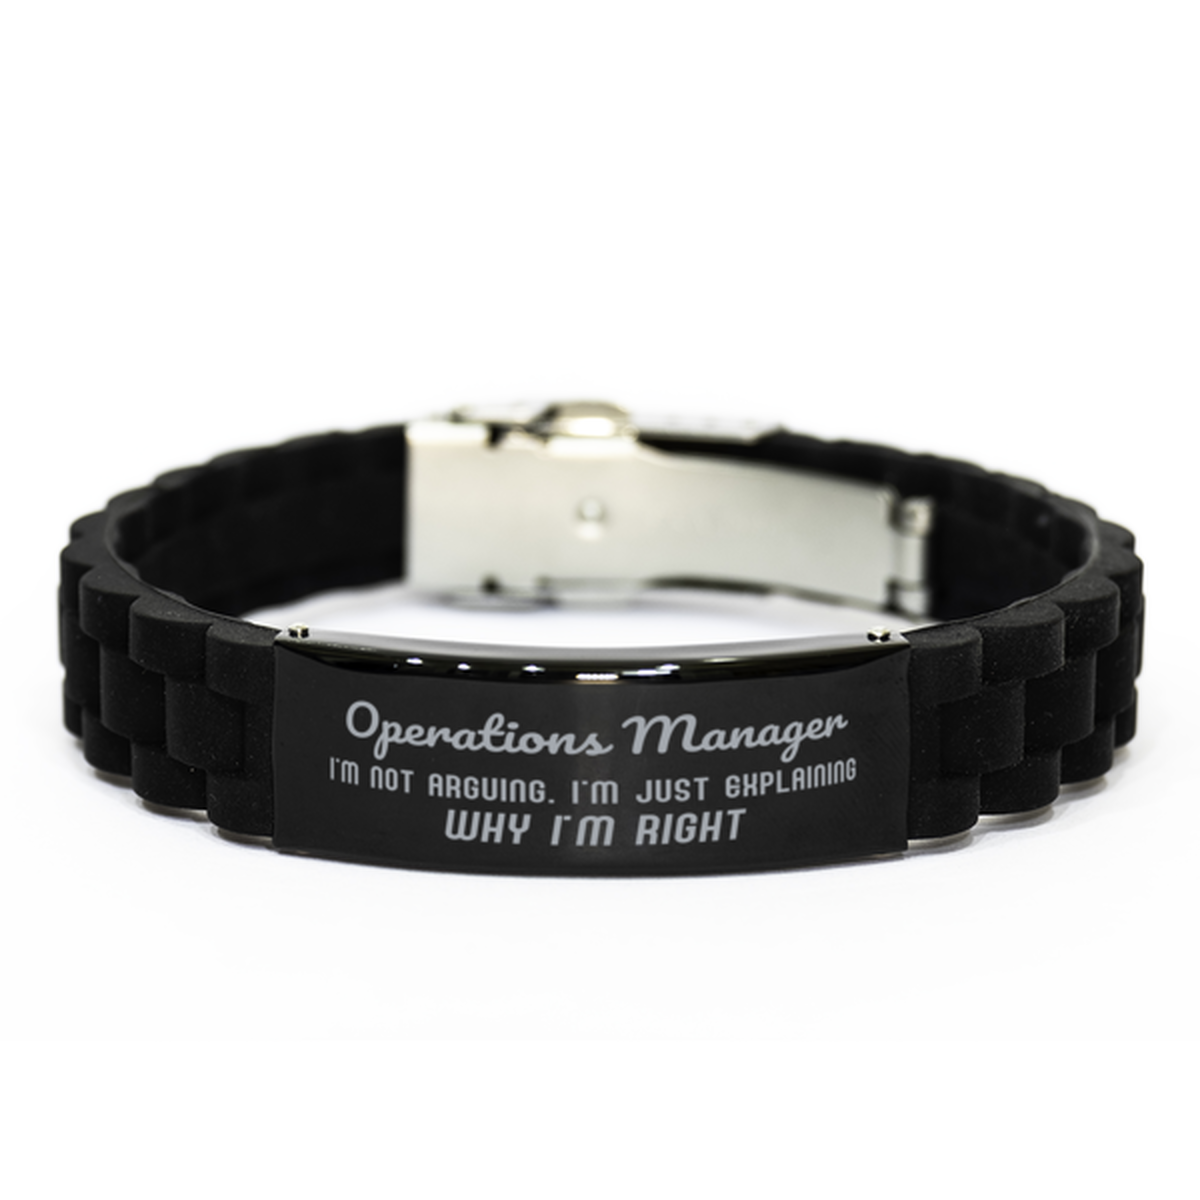 Operations Manager I'm not Arguing. I'm Just Explaining Why I'm RIGHT Black Glidelock Clasp Bracelet, Funny Saying Quote Operations Manager Gifts For Operations Manager Graduation Birthday Christmas Gifts for Men Women Coworker